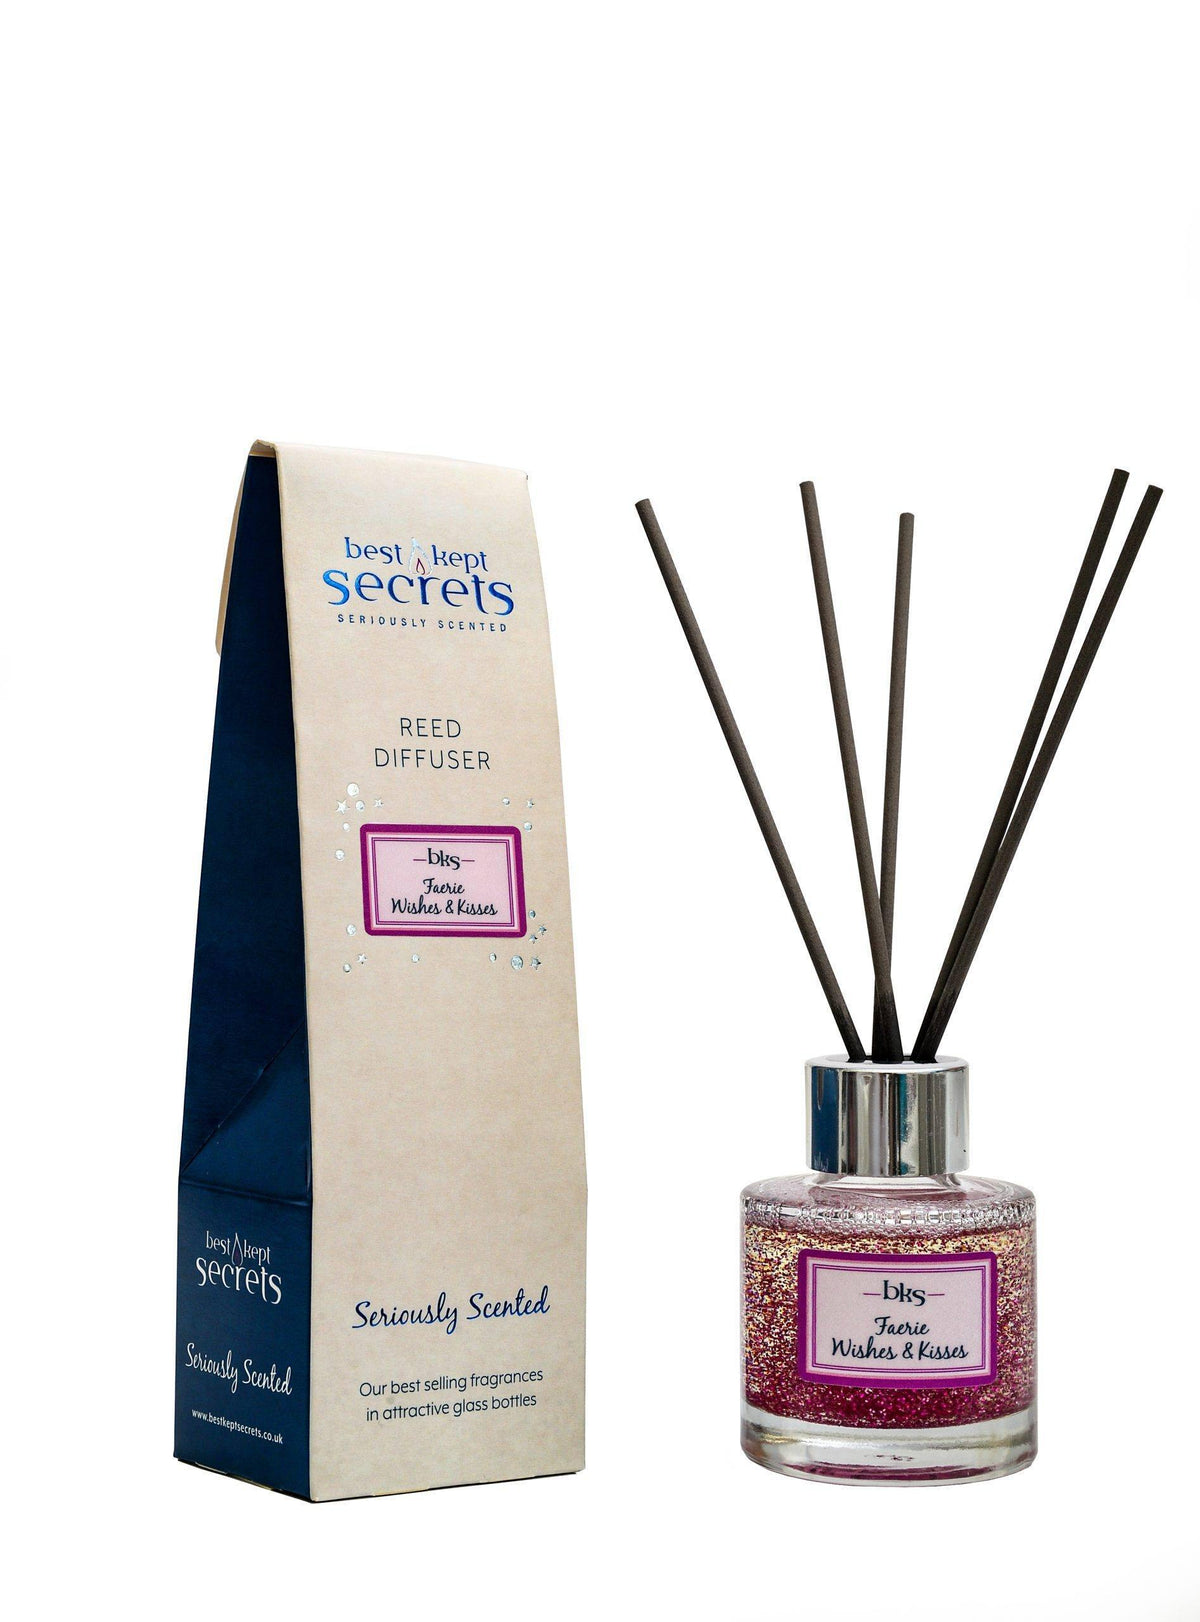 Sparkly Diffusers - Faerie Wishes and Kisses Diffusers Foxyavenue UK